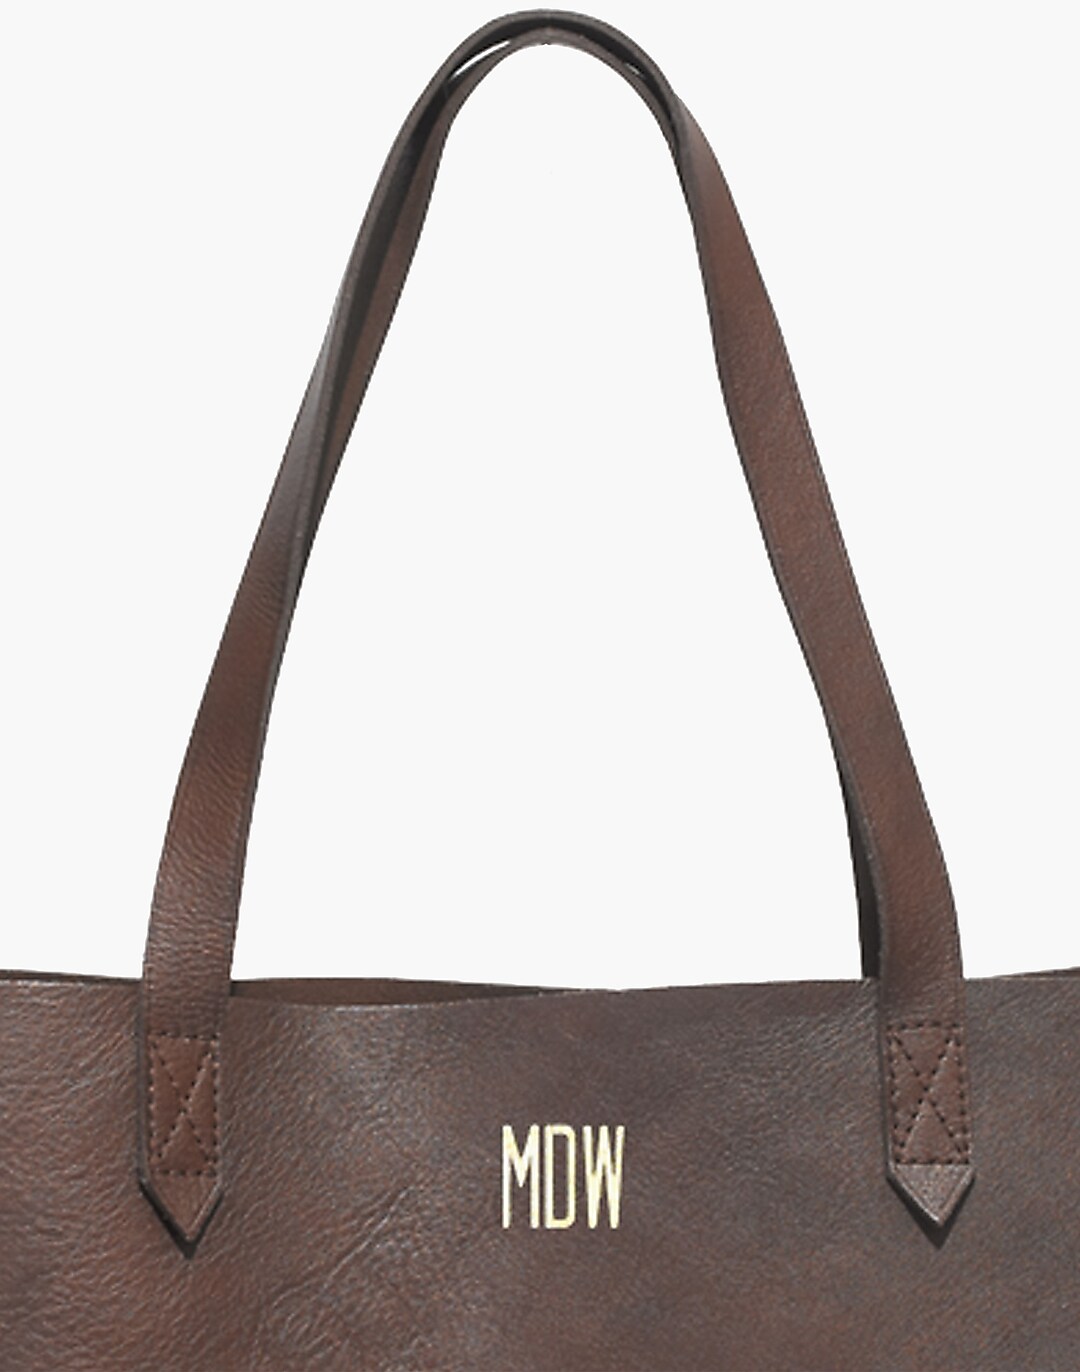 Madewell The Foldover Transport Tote in Black